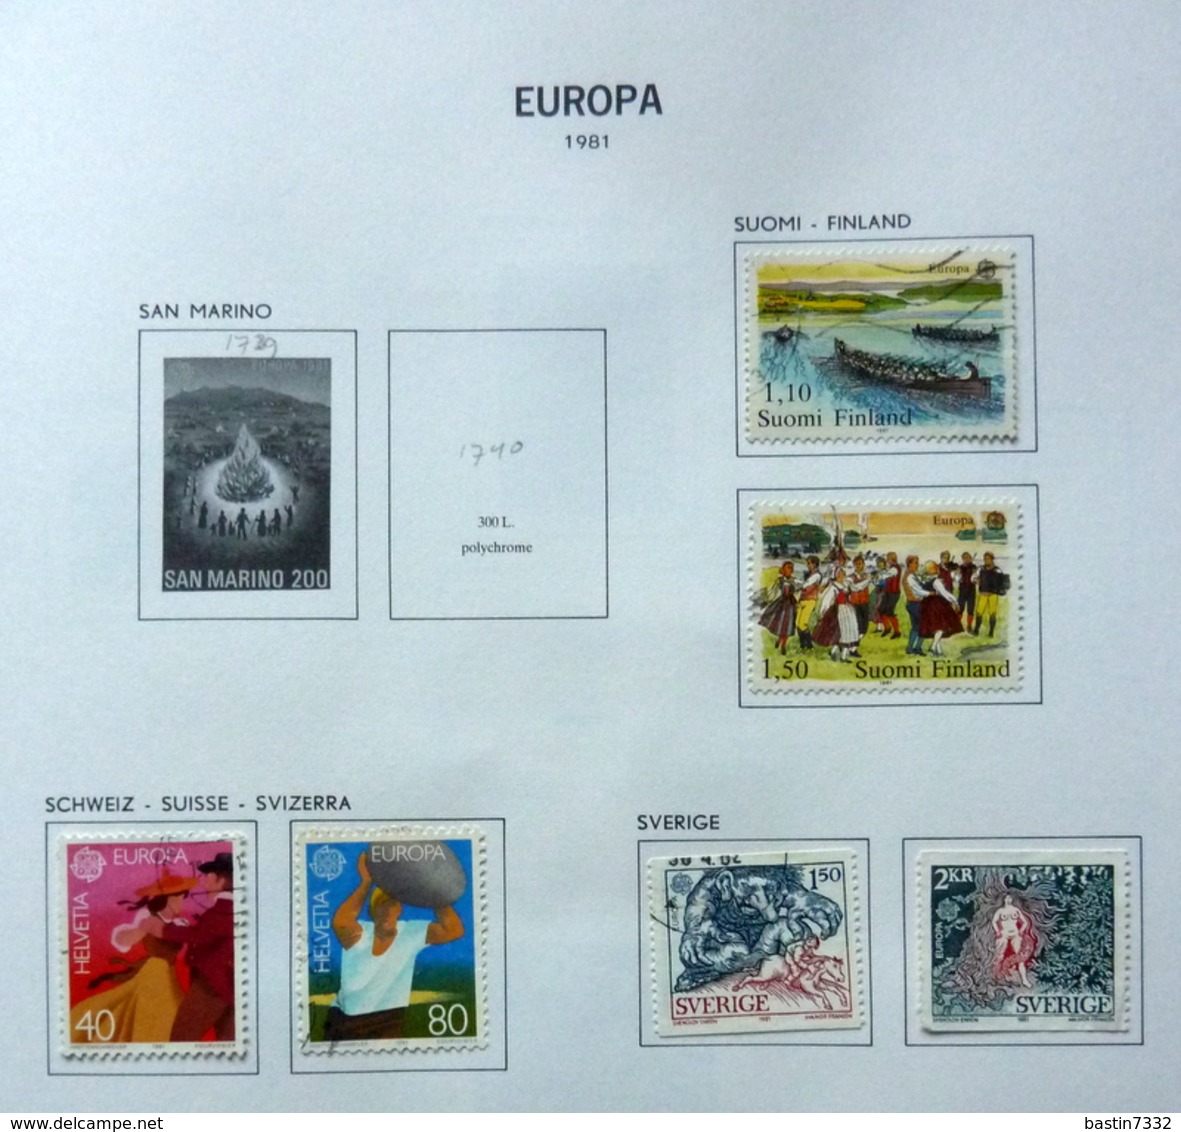 Europe collection in Davo album(2)